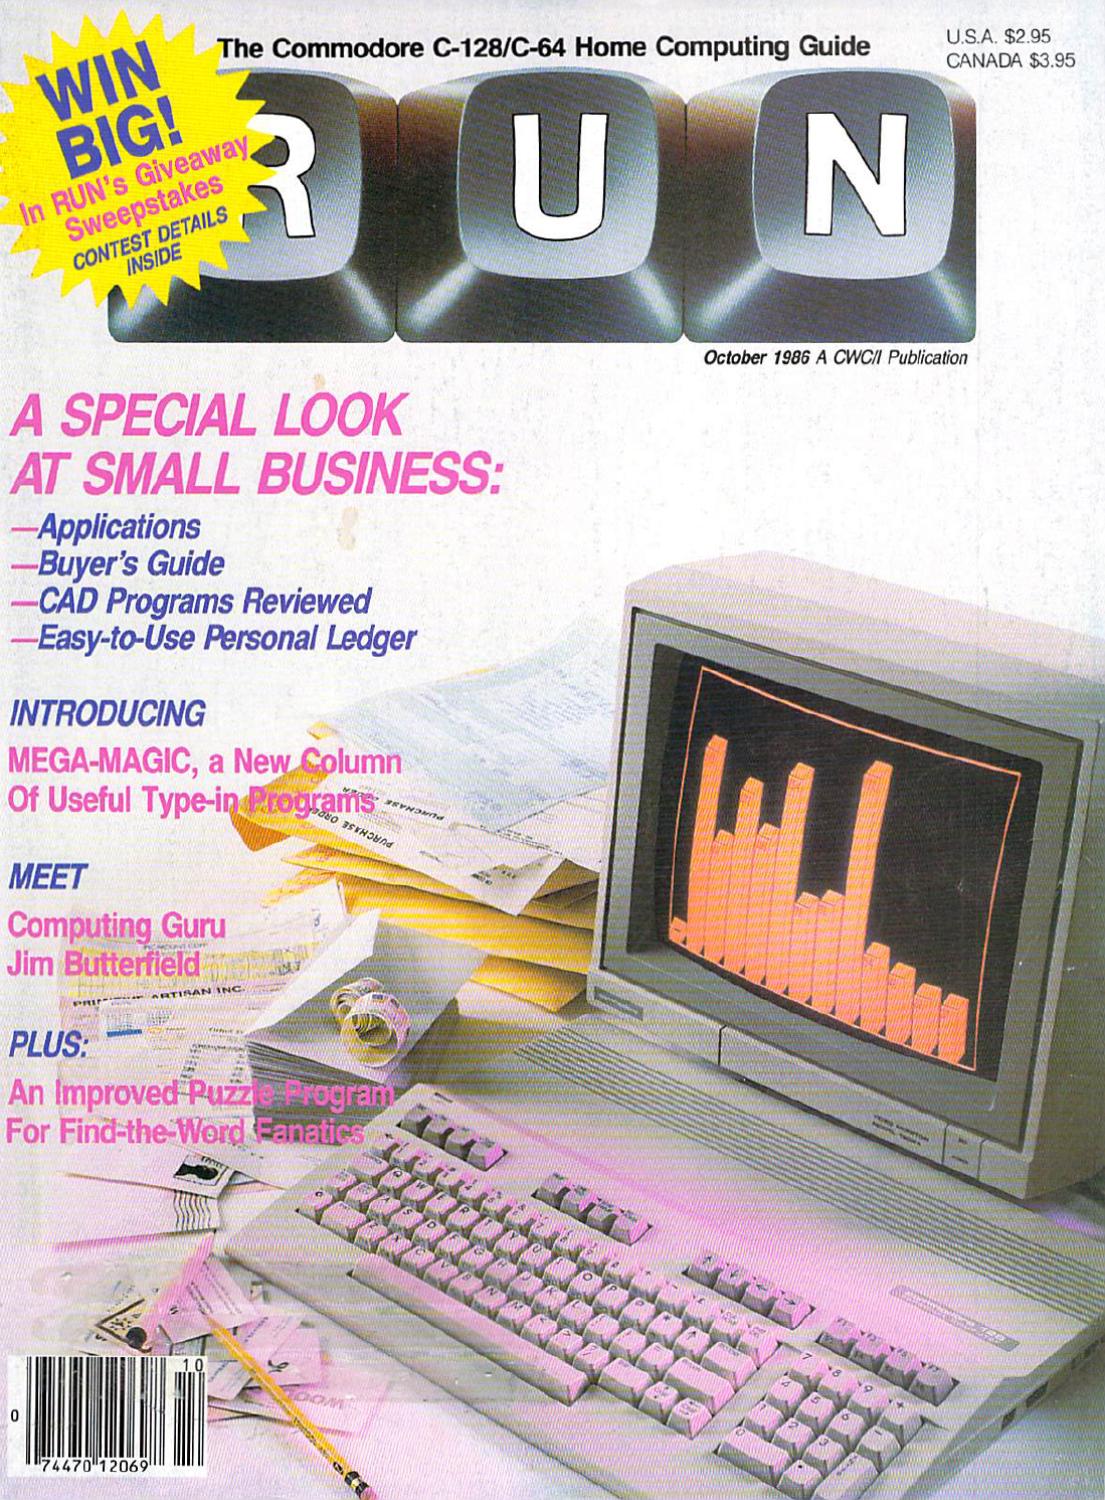 Fireplace Simulator Unique Run issue 34 1986 Oct by Zetmoon issuu